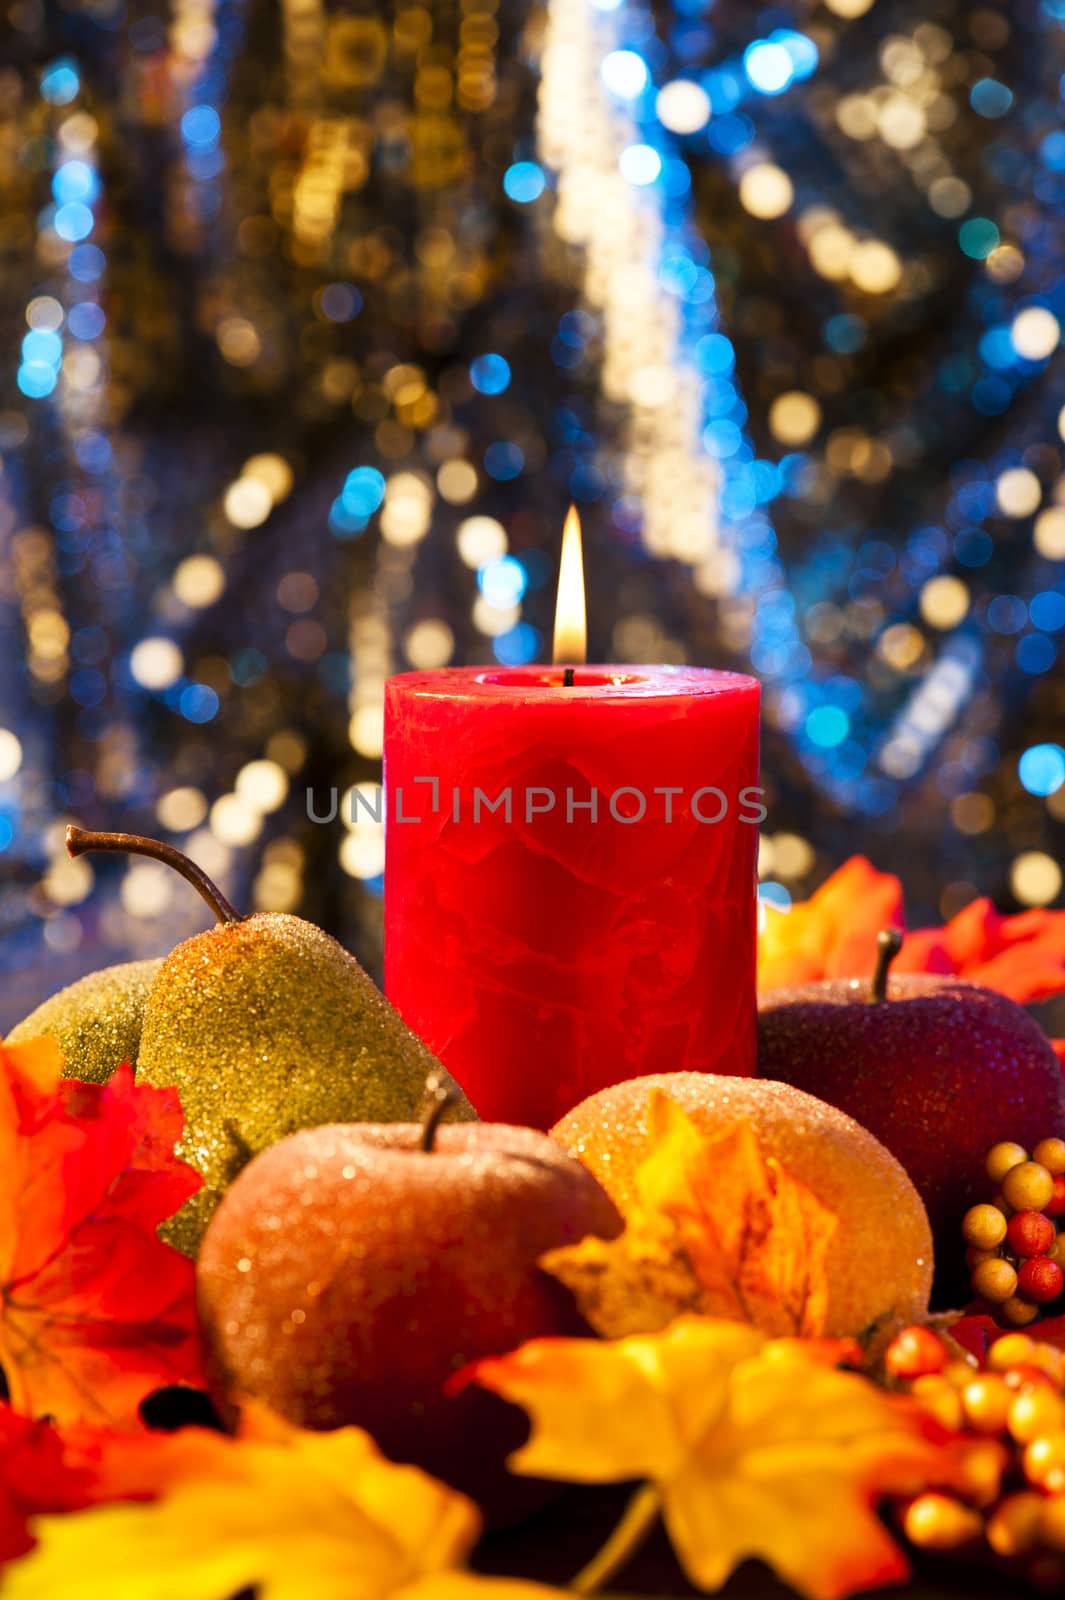 Candles in nice and beautiful colorful autumn leaves